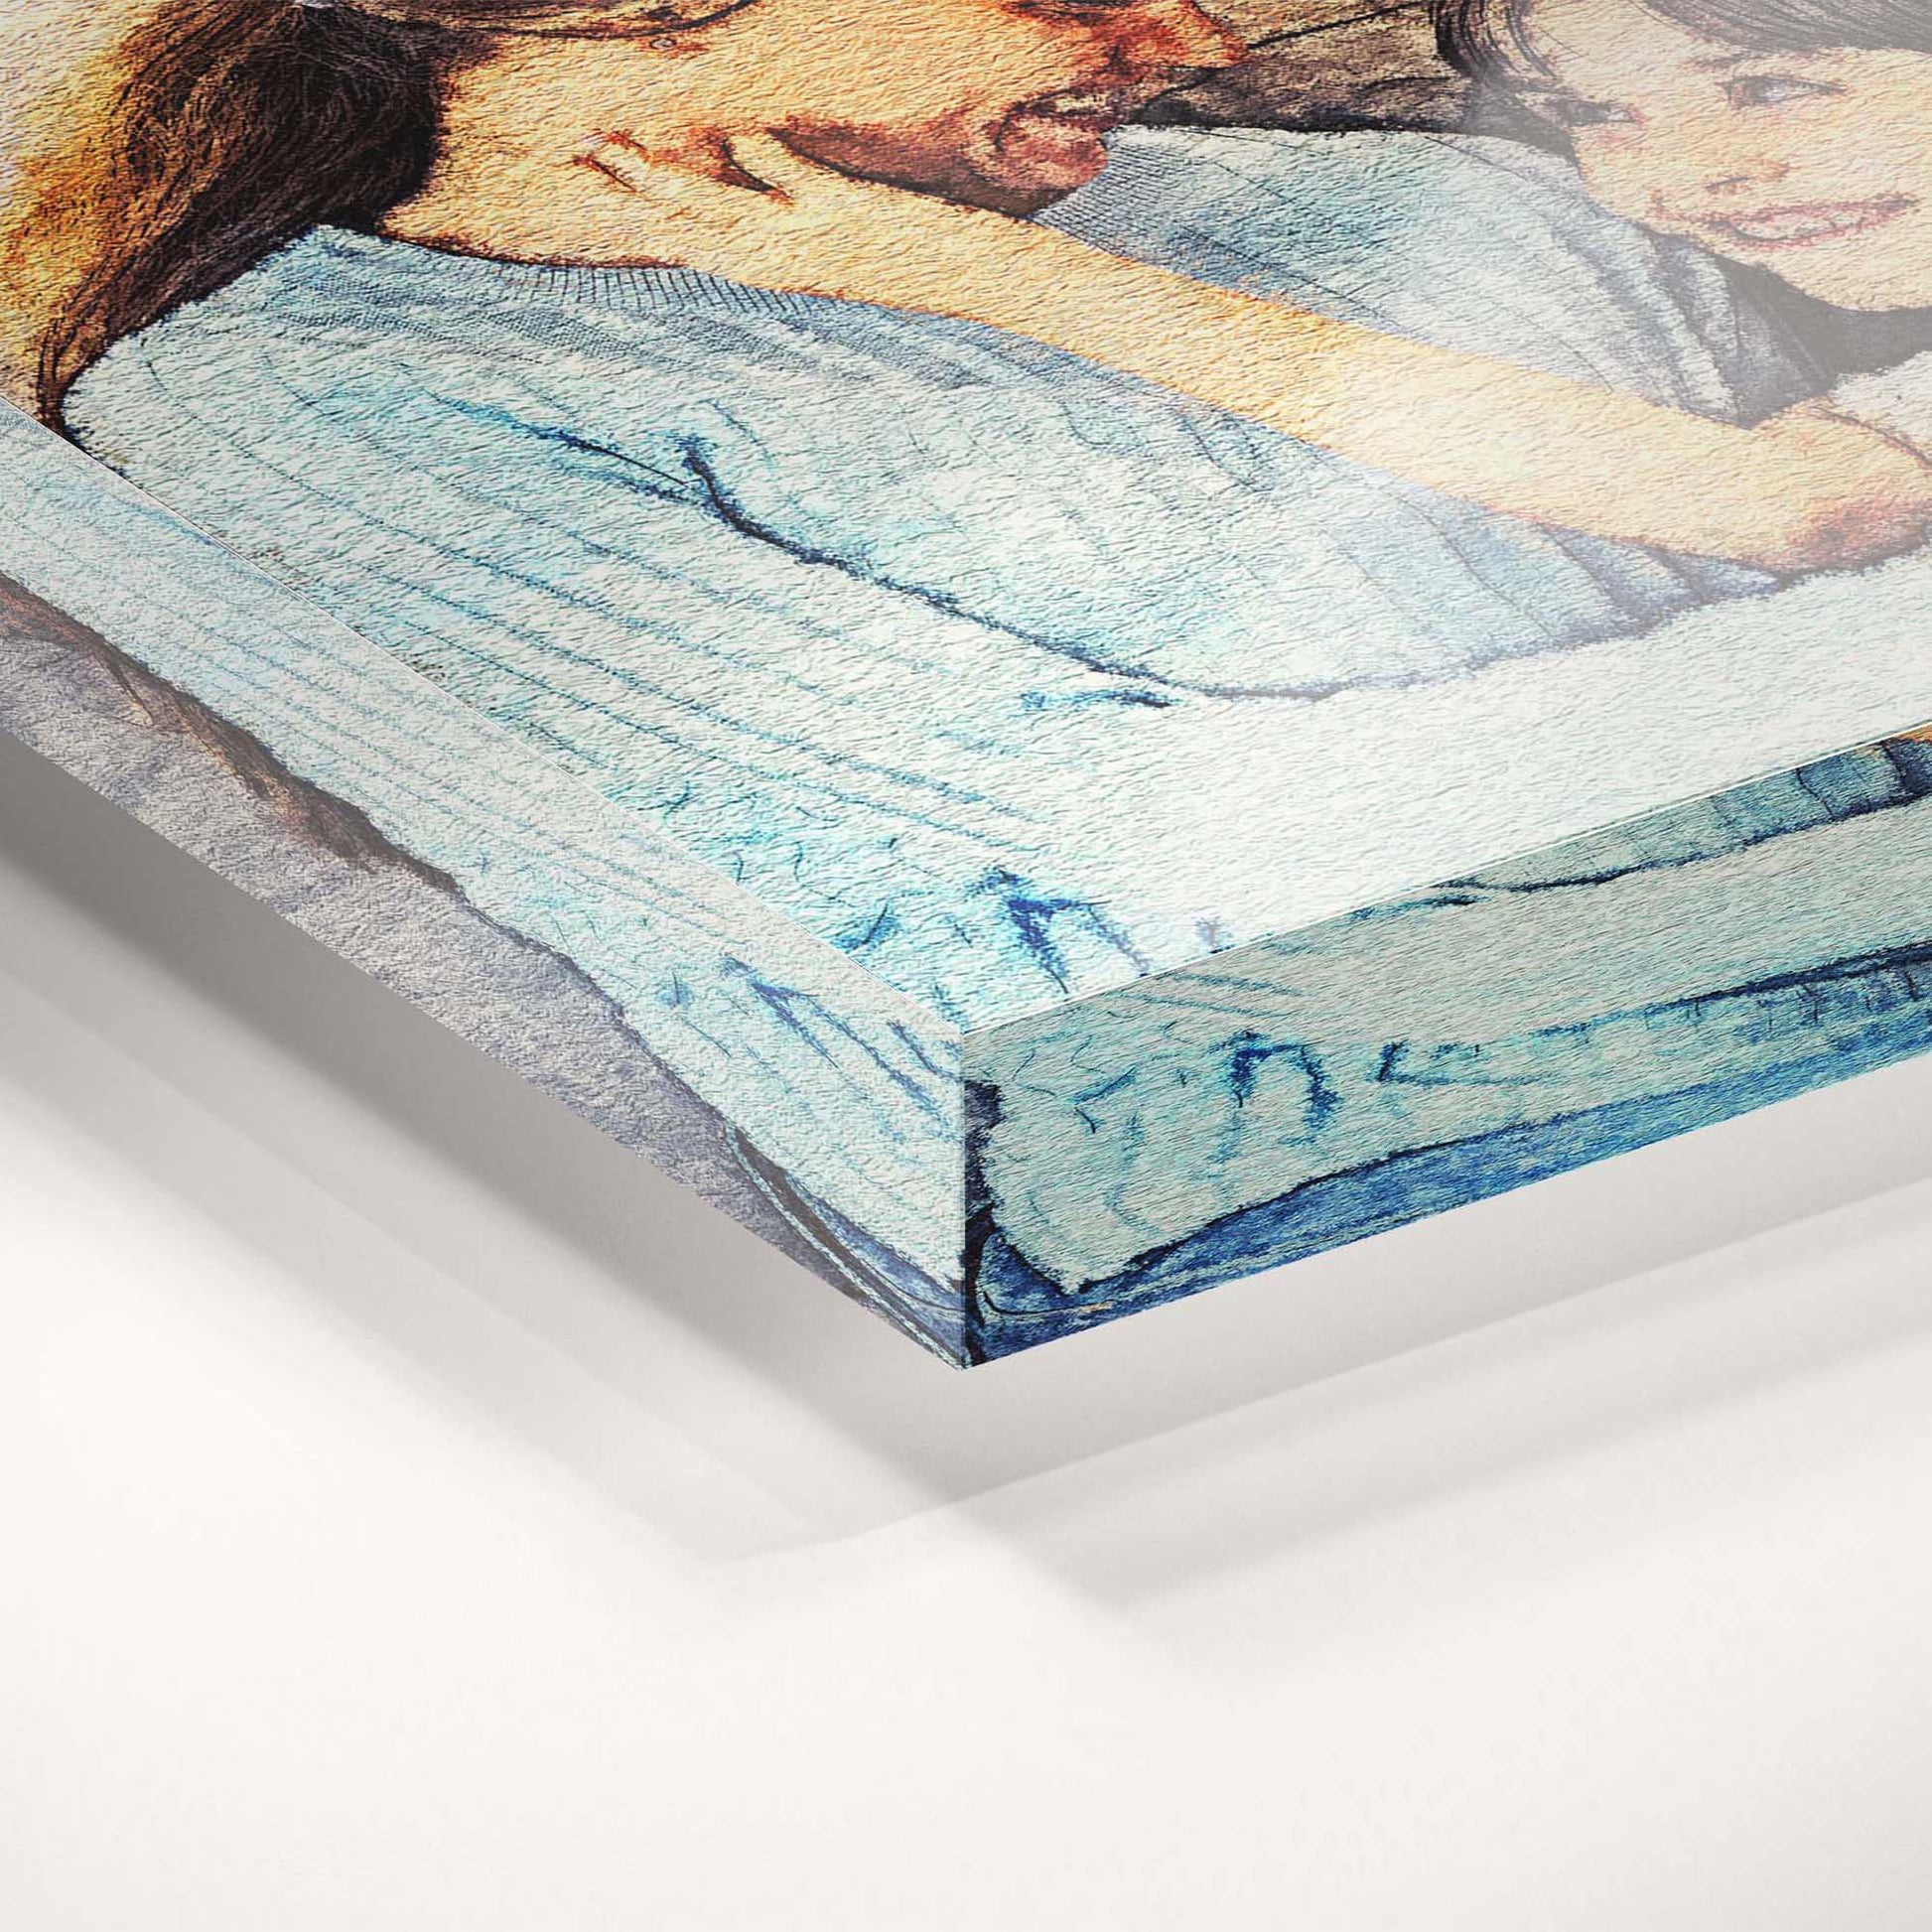 Preserve the magic of your family's moments with our Personalised Aquarelle Acrylic Block Photo. Each piece is crafted from your own photo, transformed into a stunning watercolor-style artwork that embodies the love and joy of your family